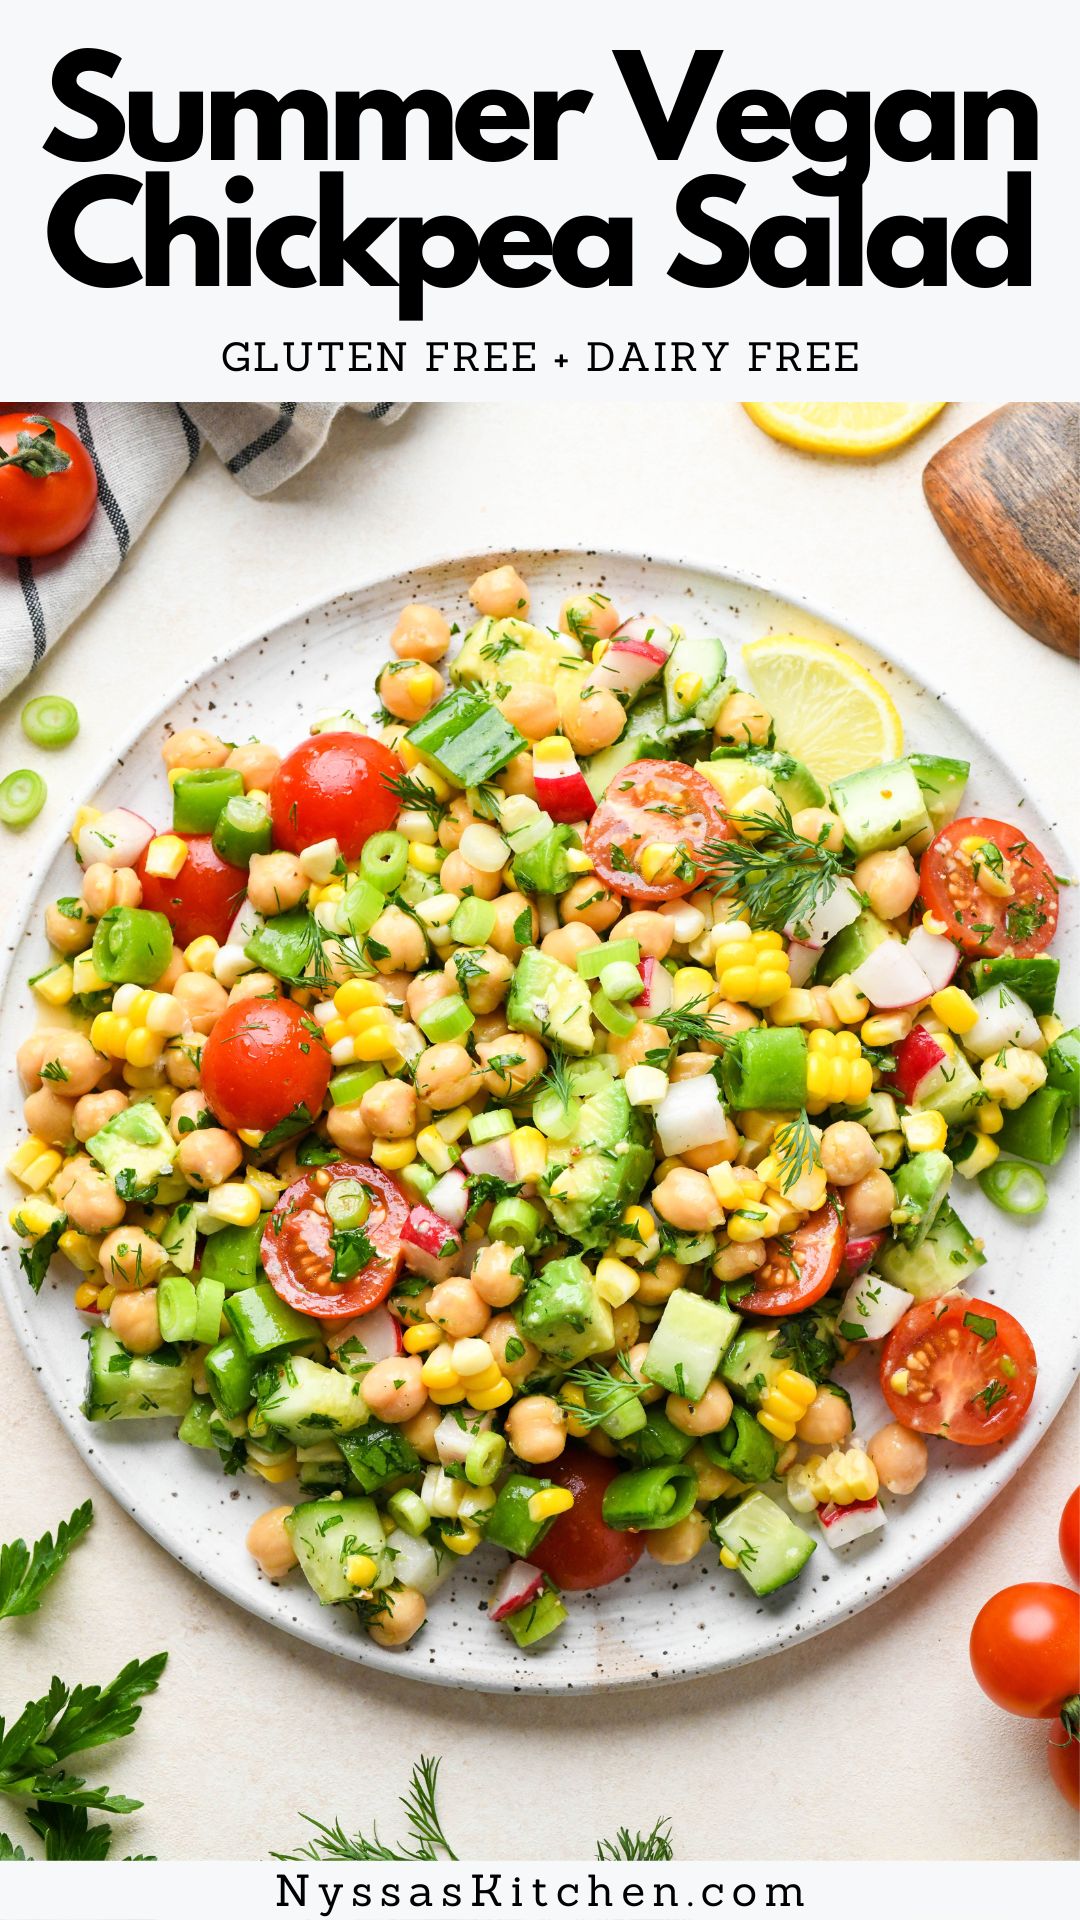 This easy chopped vegan chickpea salad is made with a rainbow of fresh veggies, creamy avocado, dill, parsley, green onions, and a simple lemony dressing. A healthy and unique recipe that's perfect for a quick lunch, summer BBQ, or potluck! Vegan, vegetarian, dairy free, gluten free!